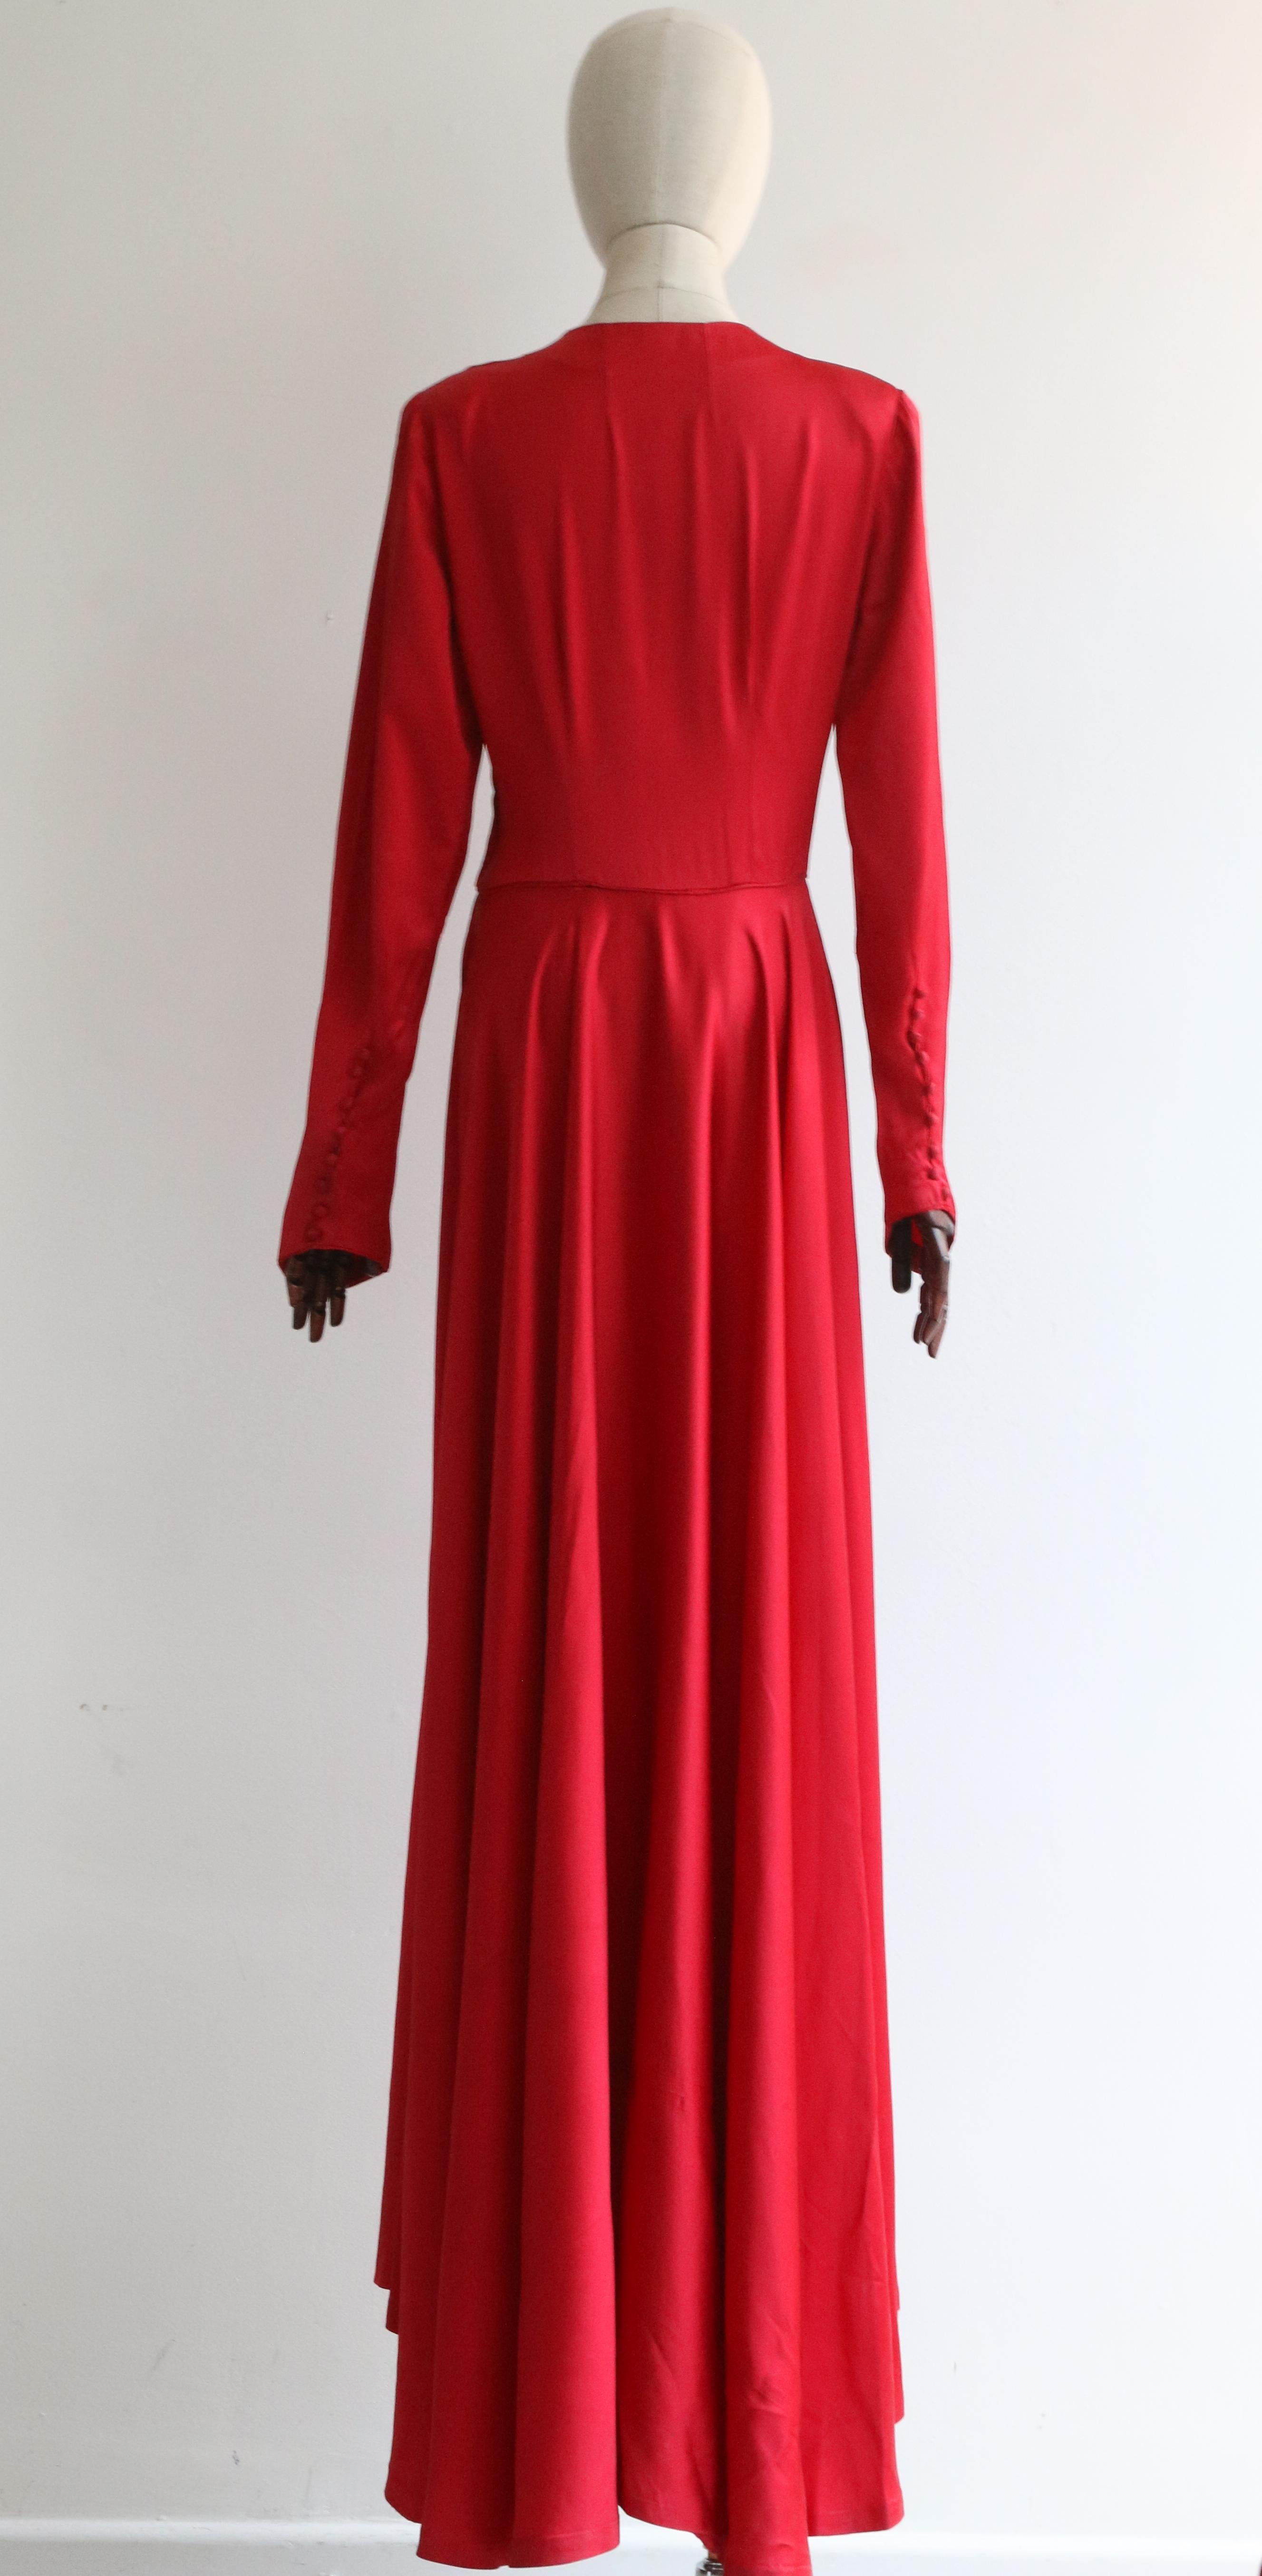 Women's Vintage Early 1940's Crimson Red Satin Evening Dress UK 10-12 US 6-8 For Sale